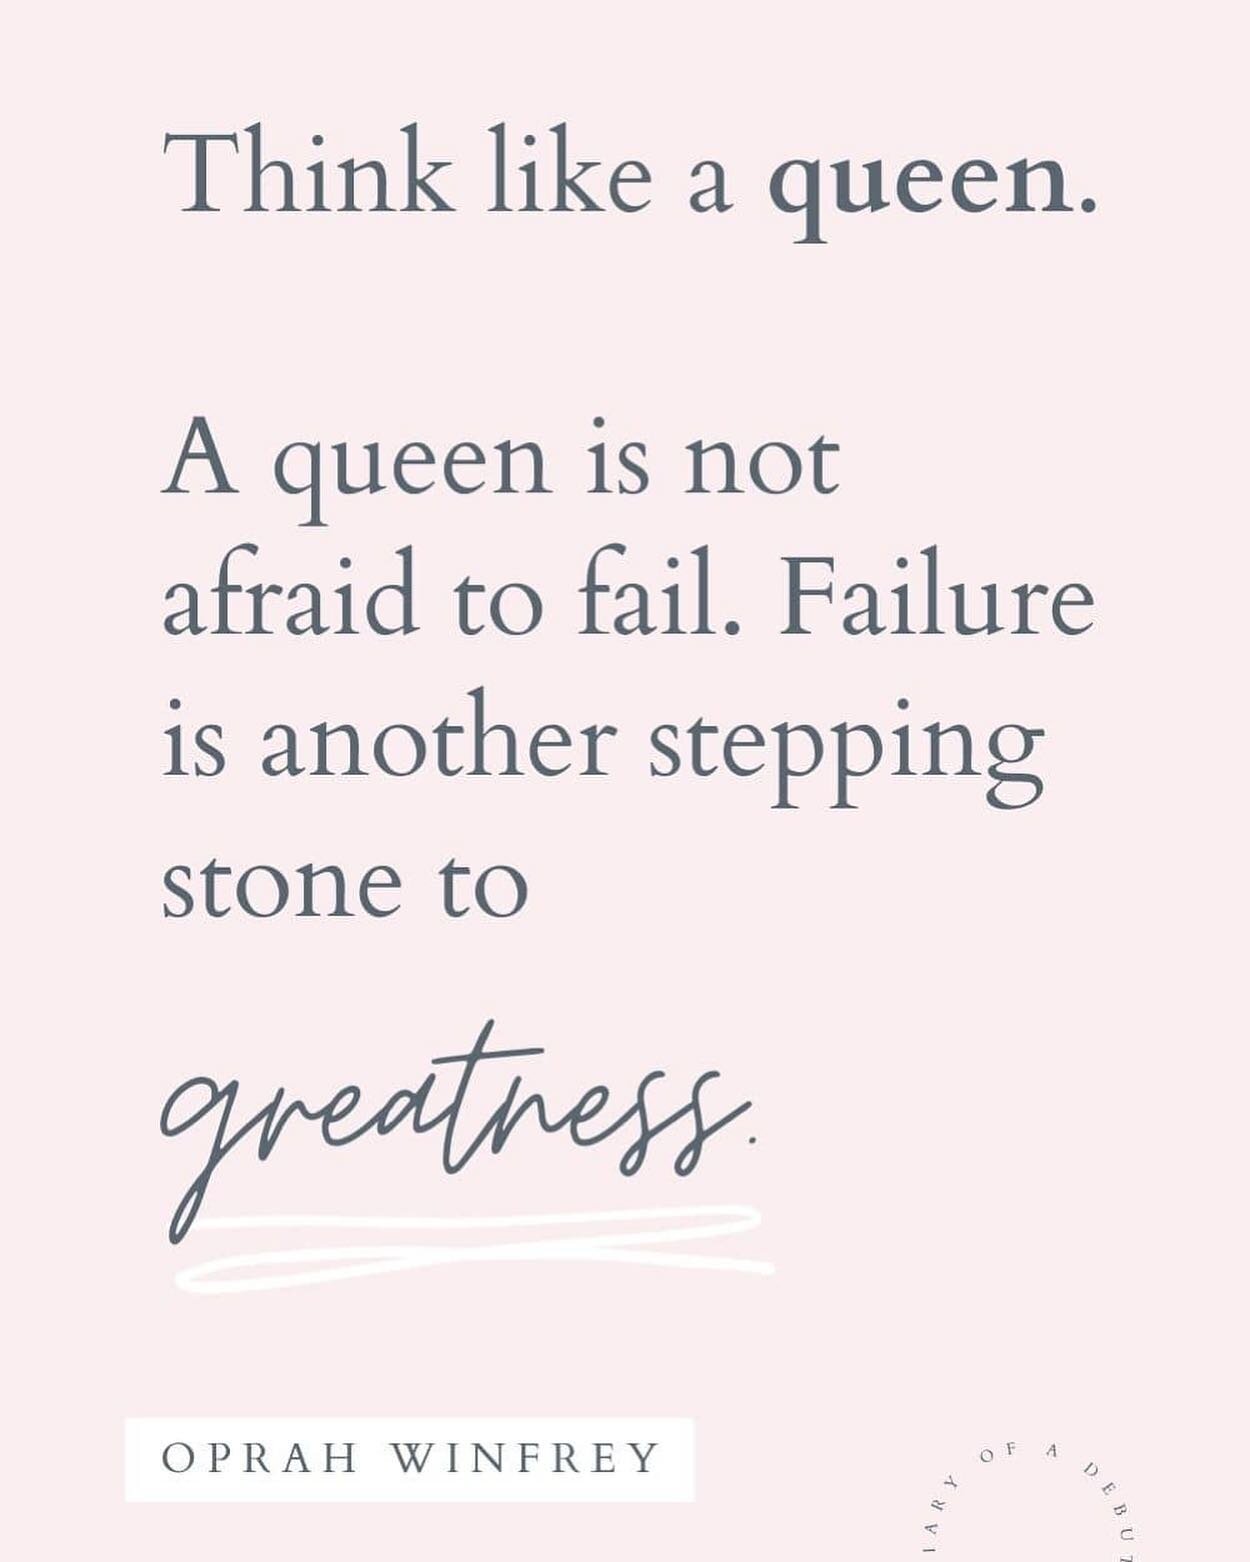 Happy International Woman&rsquo;s Day to all the ladies out there! Keep pushing yourself to be the best version of yourself and don&rsquo;t let anyone tell you otherwise! Be the Queen that YOU are! #womanpower #internationalwomensday #betterversion